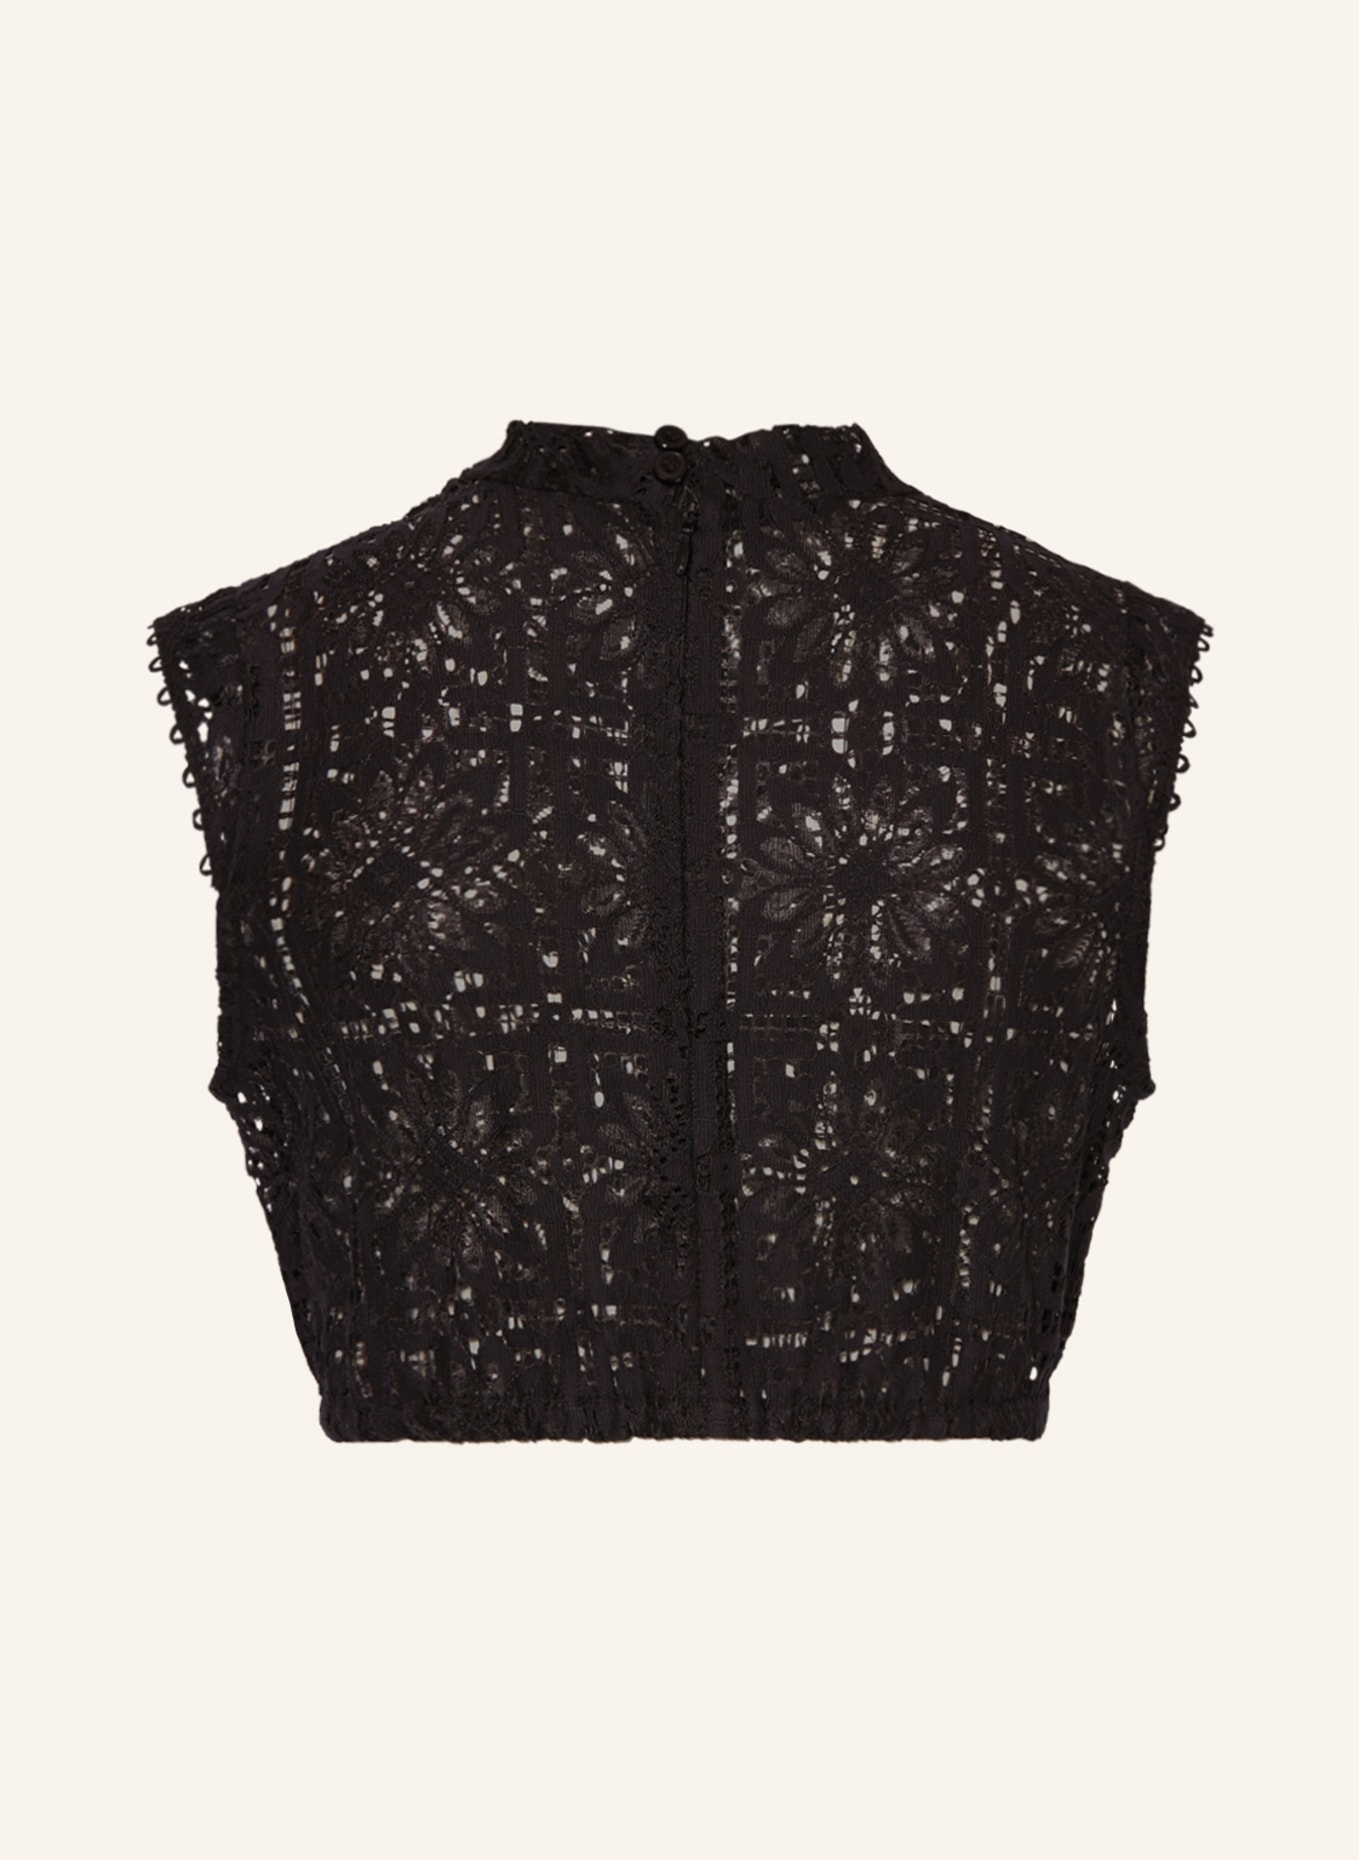 BOSS Dirndl blouse CARIN made of crochet lace, Color: BLACK (Image 2)